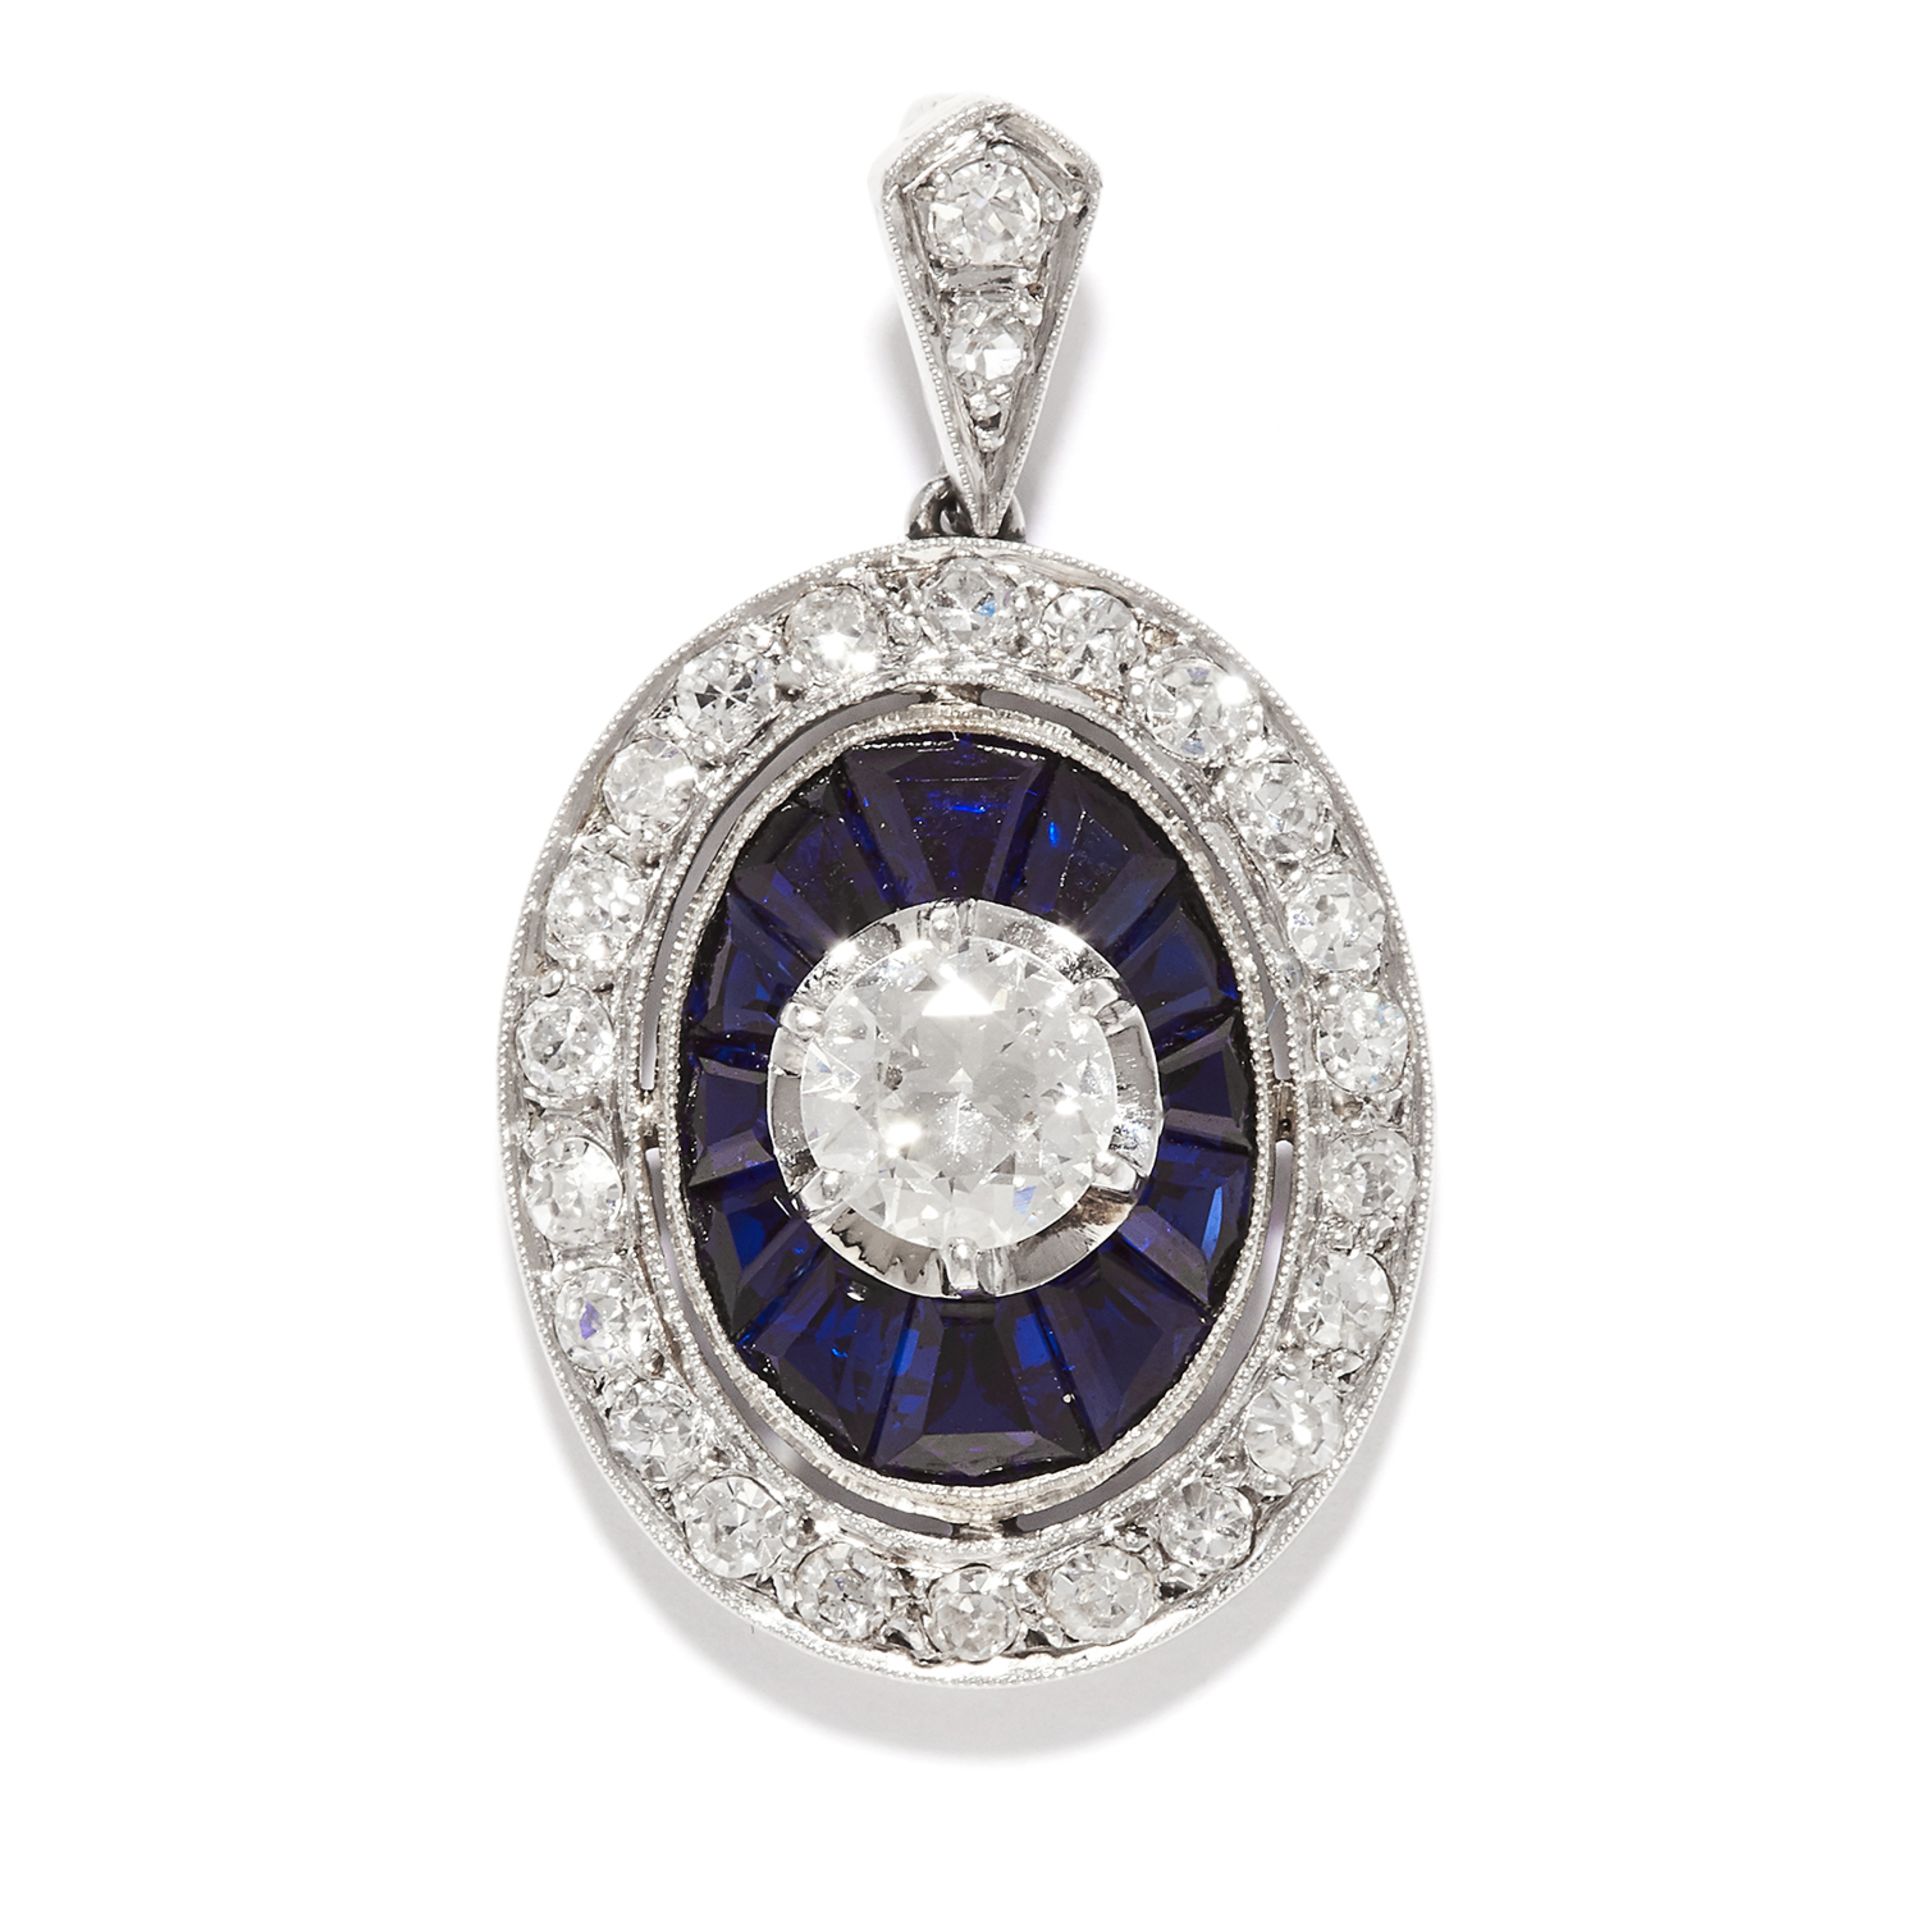 DIAMOND AND SAPPHIRE PENDANT in platinum, the central round cut diamond of 0.50 carats within